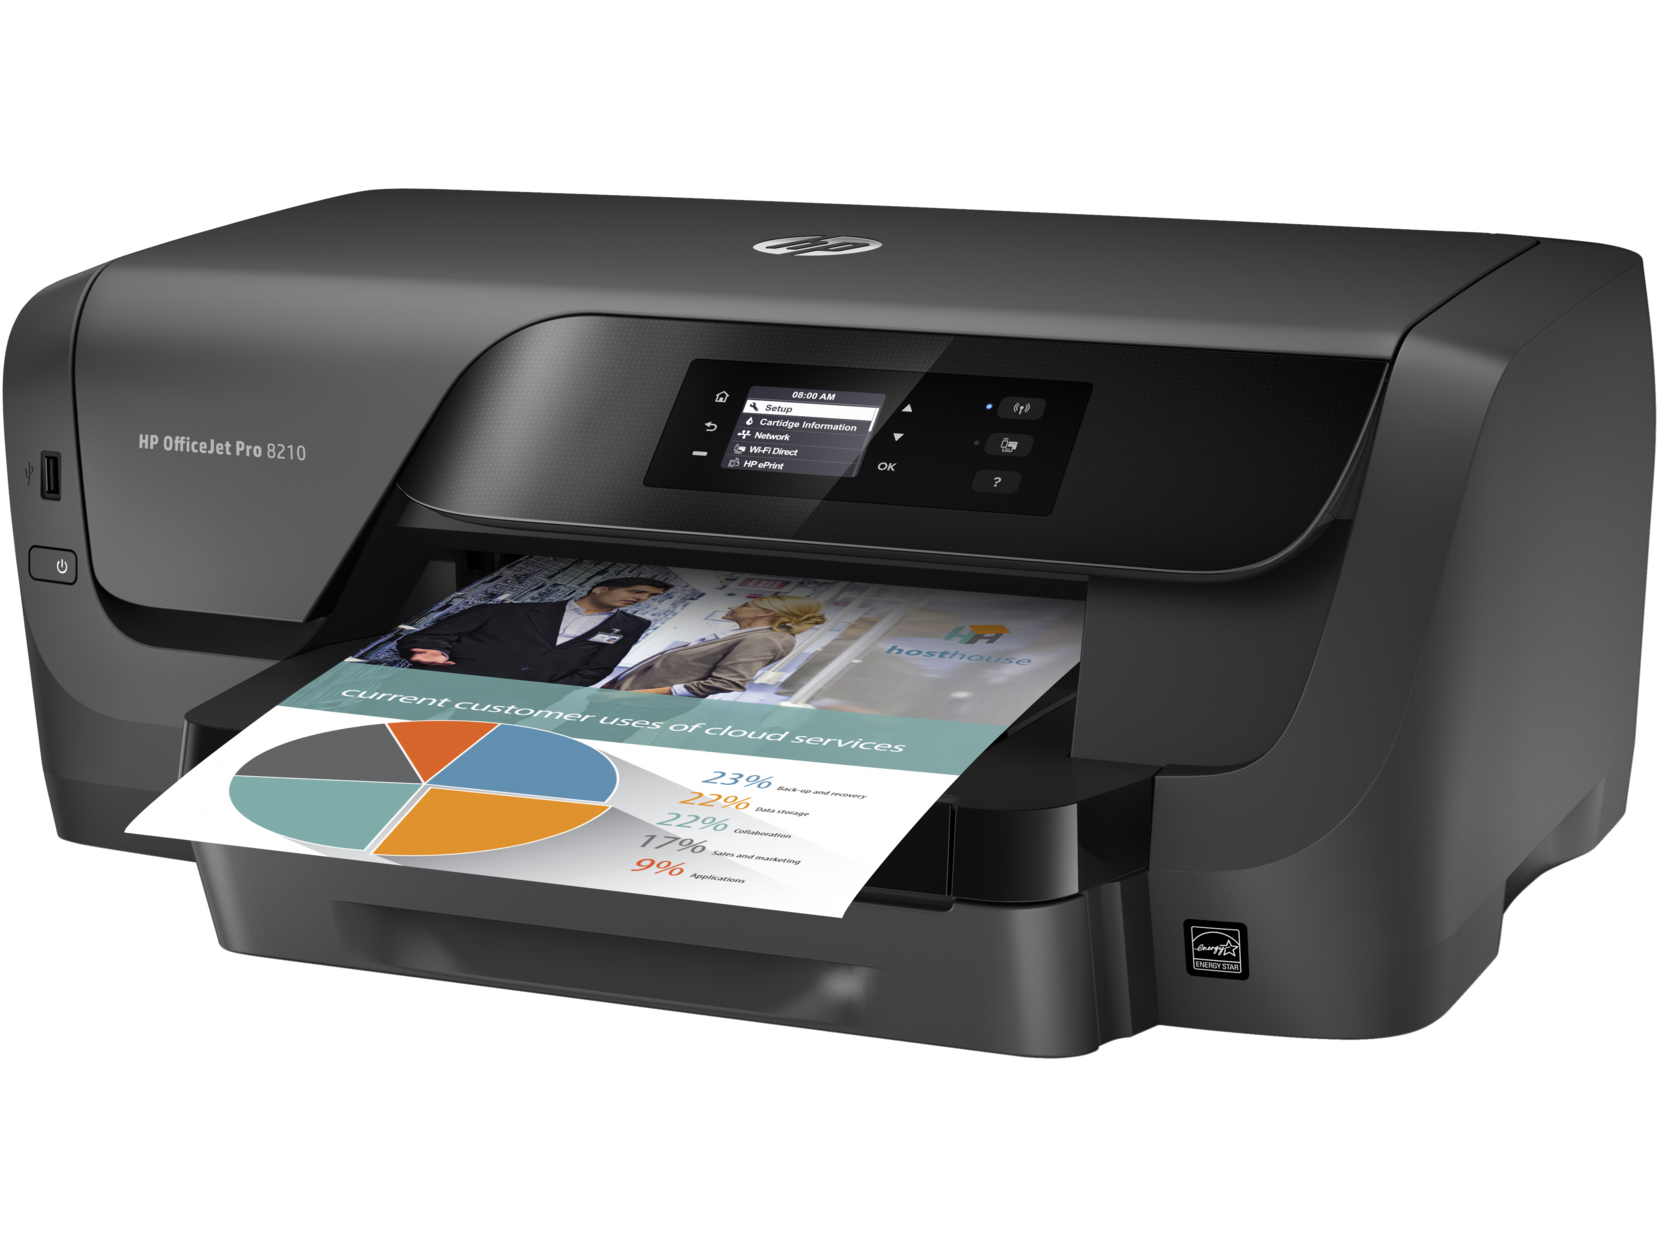 HP OfficeJet Pro 8210 Printer | Print only, wireless | D9L64A - image 2 of 7